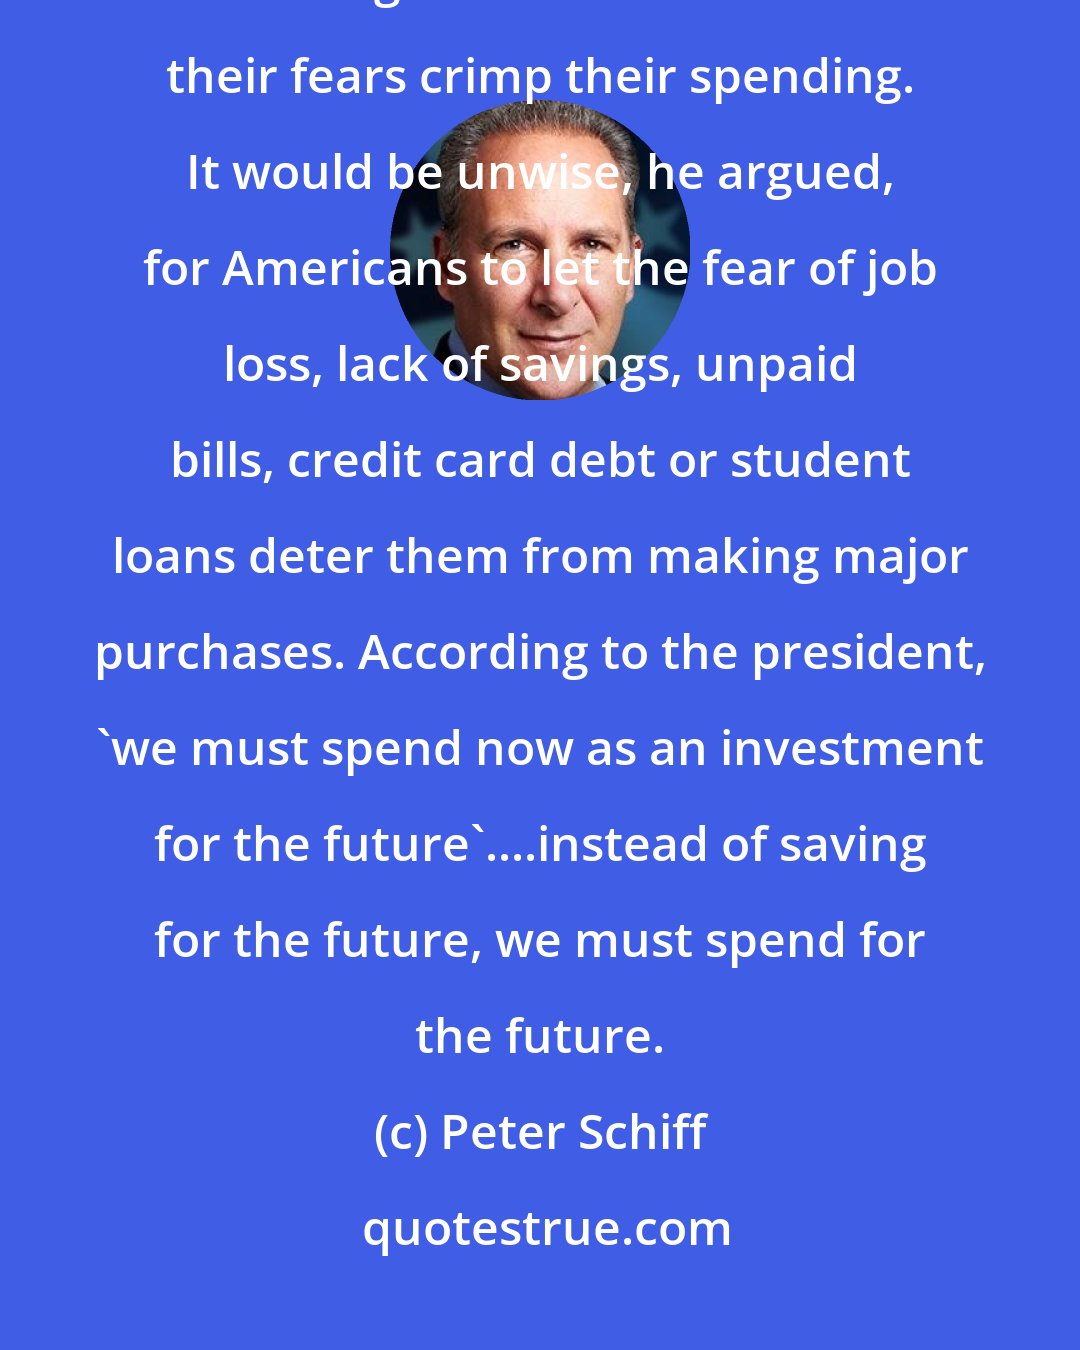 Peter Schiff: In a speech at the just-concluded G20 summit in London, President Obama urged Americans not to let their fears crimp their spending. It would be unwise, he argued, for Americans to let the fear of job loss, lack of savings, unpaid bills, credit card debt or student loans deter them from making major purchases. According to the president, 'we must spend now as an investment for the future'....instead of saving for the future, we must spend for the future.